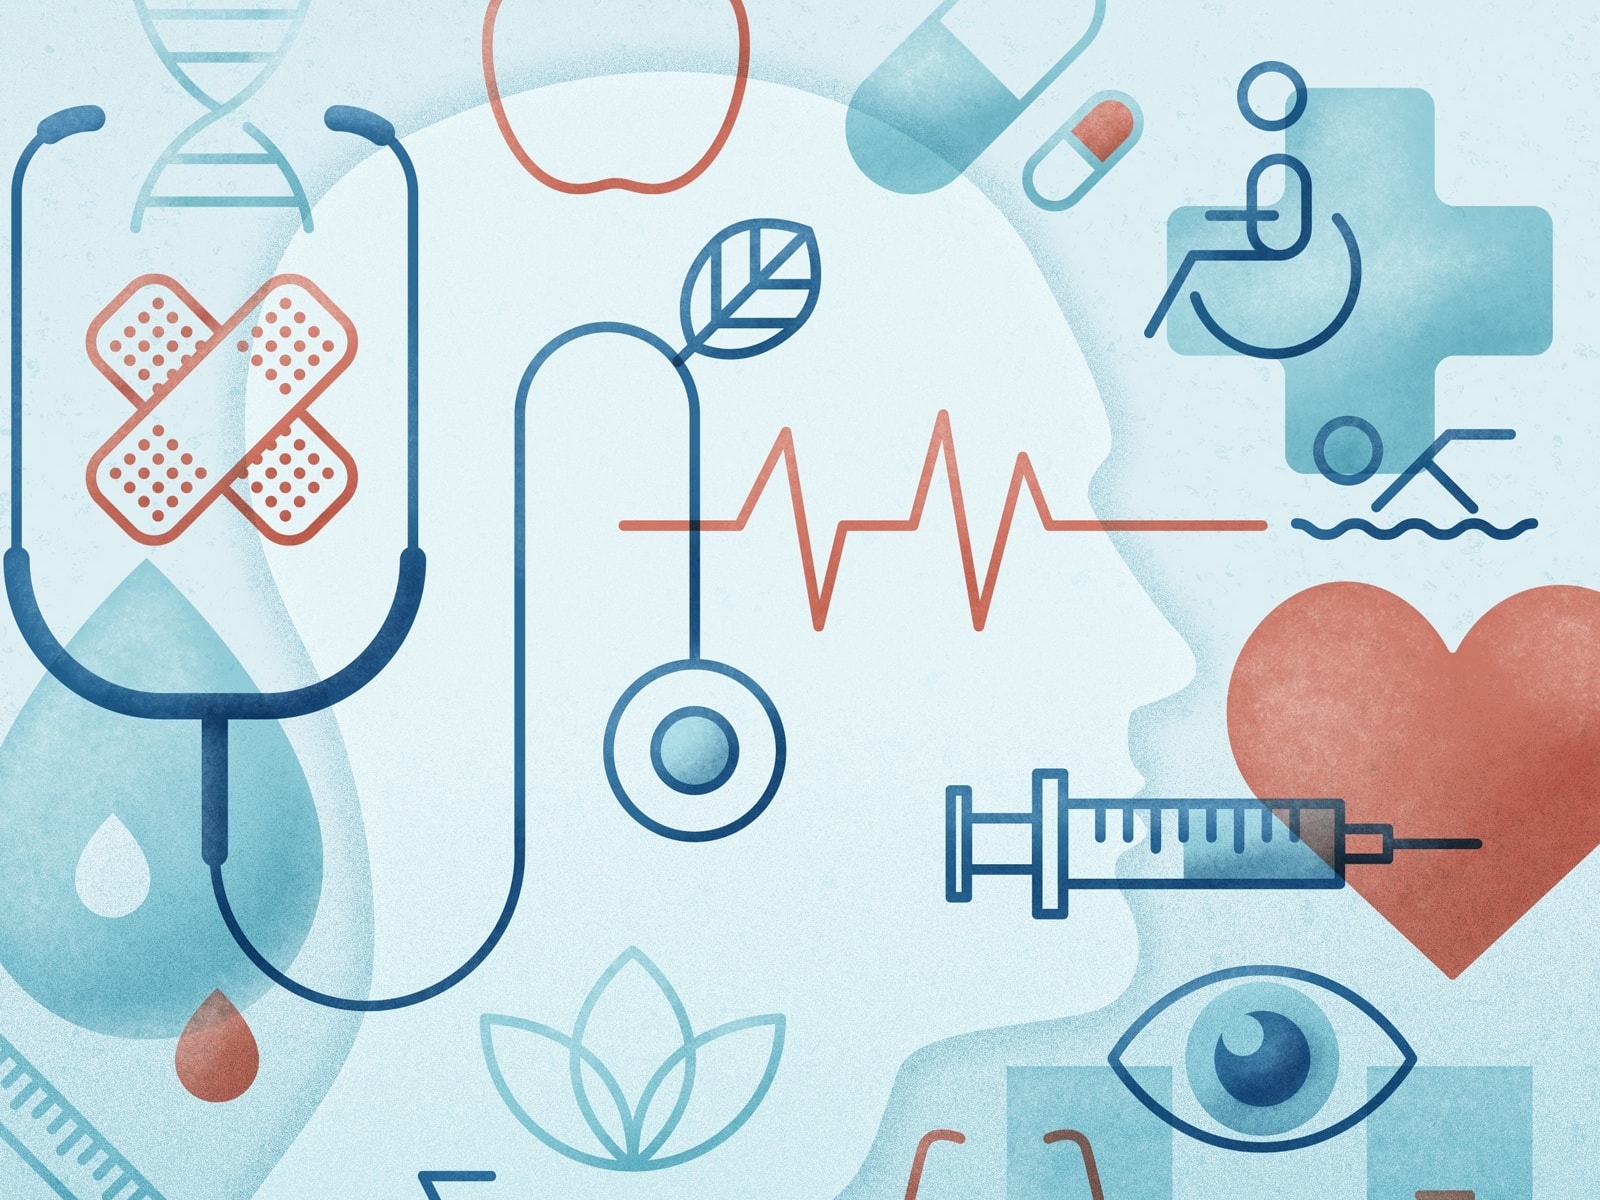 Healthcare app development features and challenges - illustration by Gary Voigt